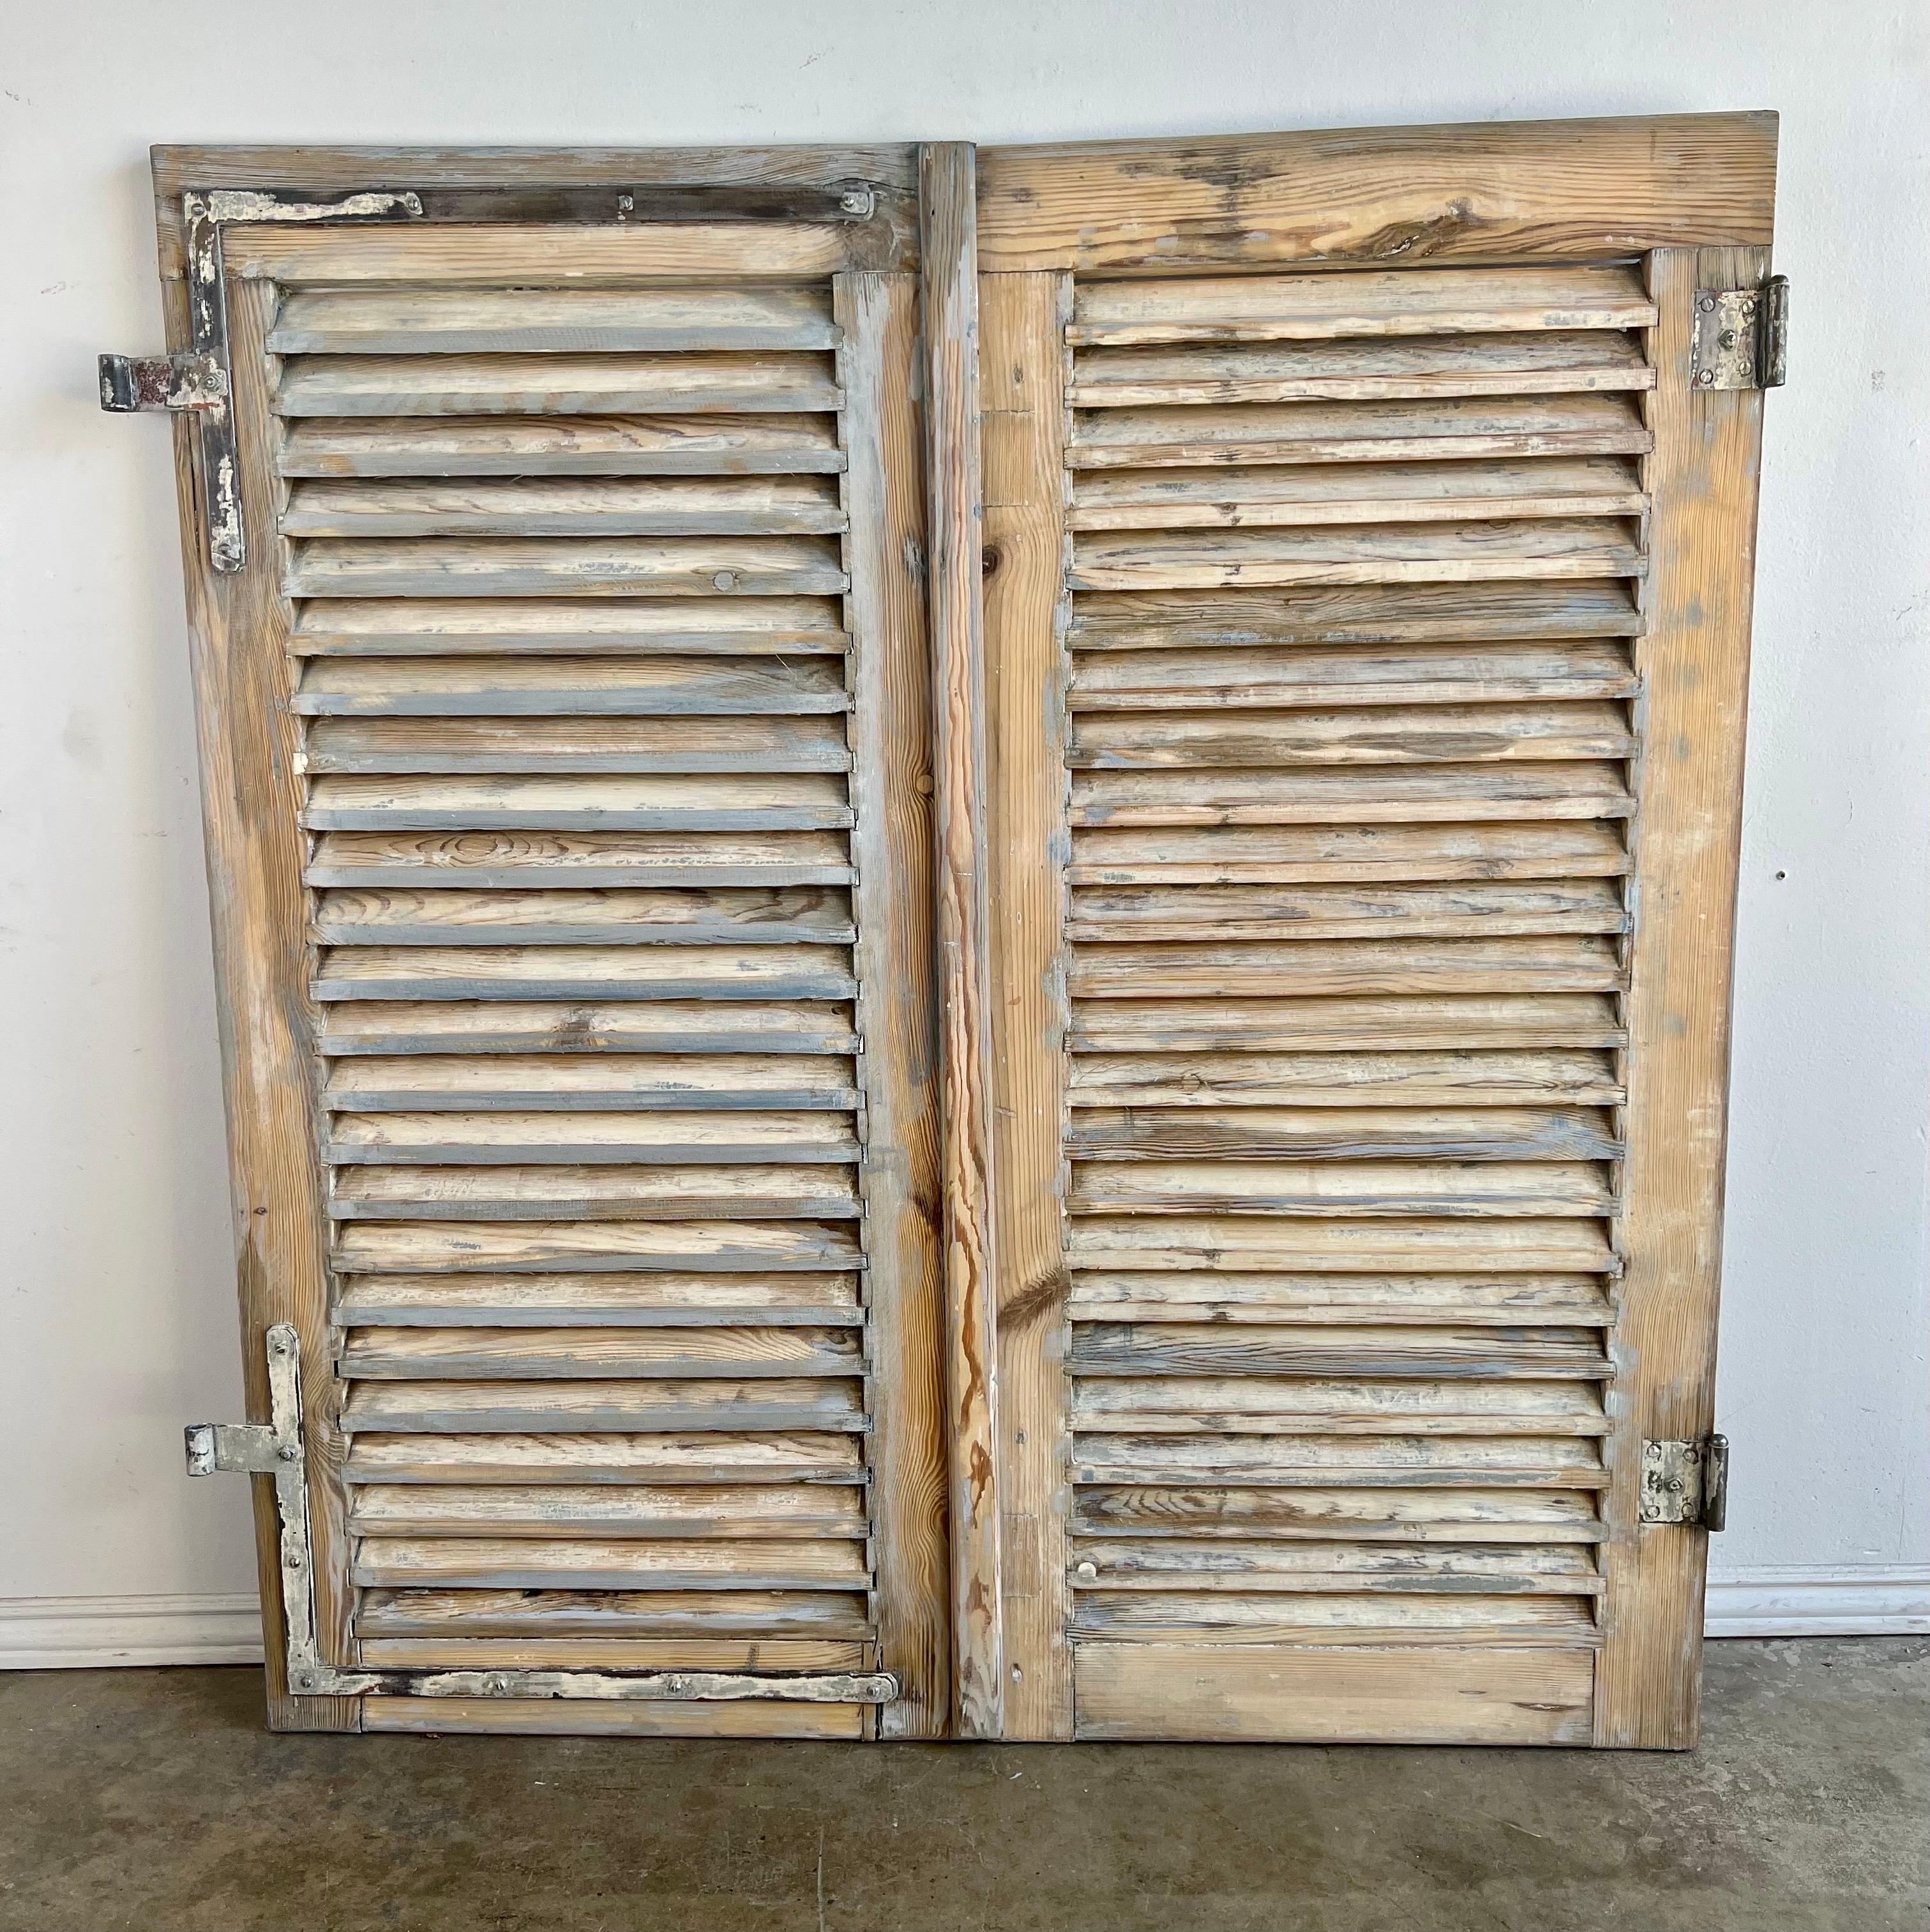 French provincial painted pair of shutters with original hardware. The worn finish is missing most of the original paint. There are two sets of shutters available. Each individual shutter measures 24